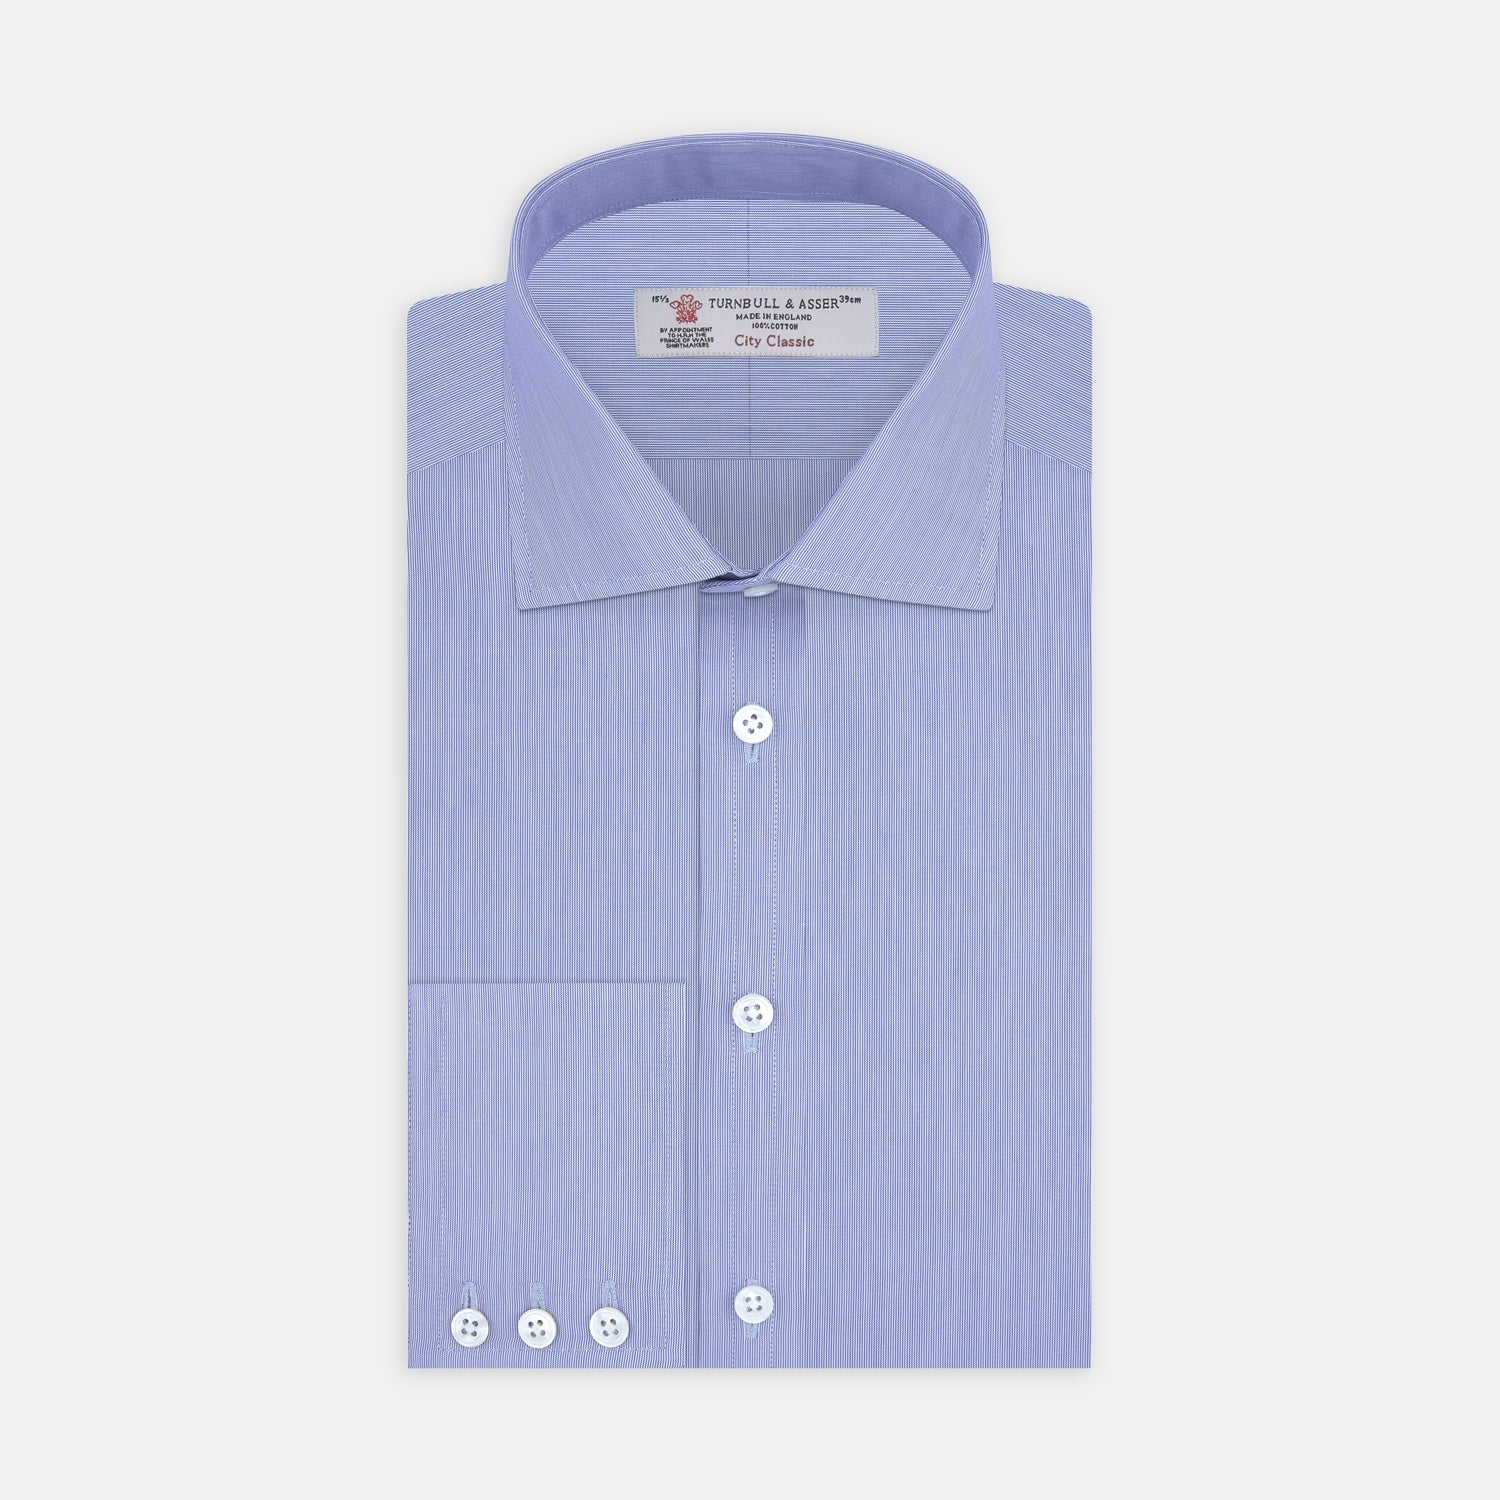 Blue Hairline Stripe Shirt with Regent Collar and 3-Button Cuffs